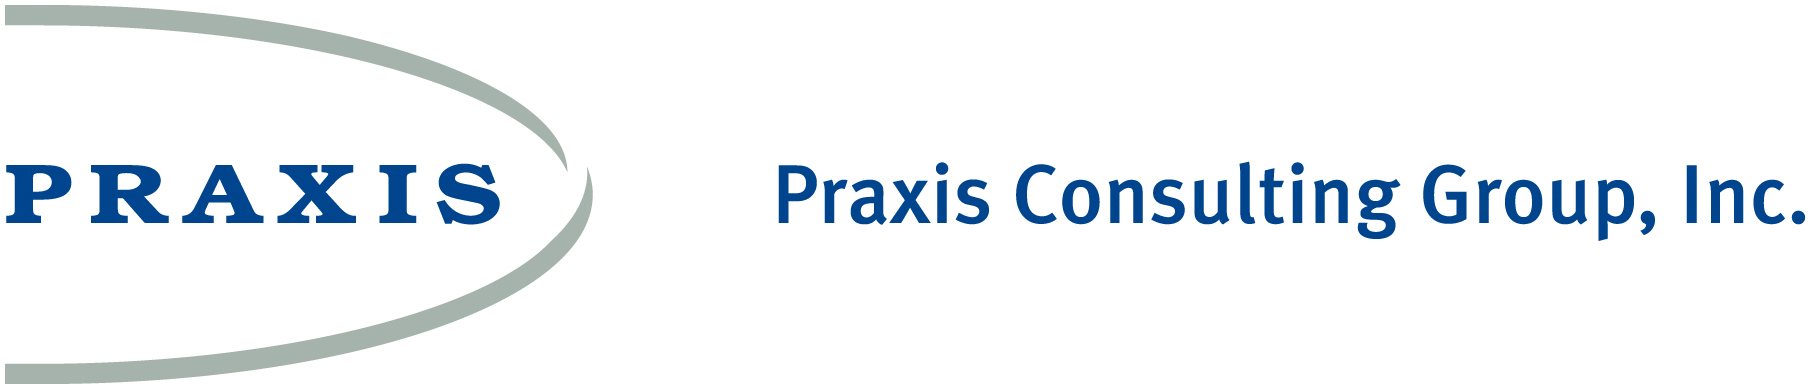 Praxis Consulting Group, Inc. logo